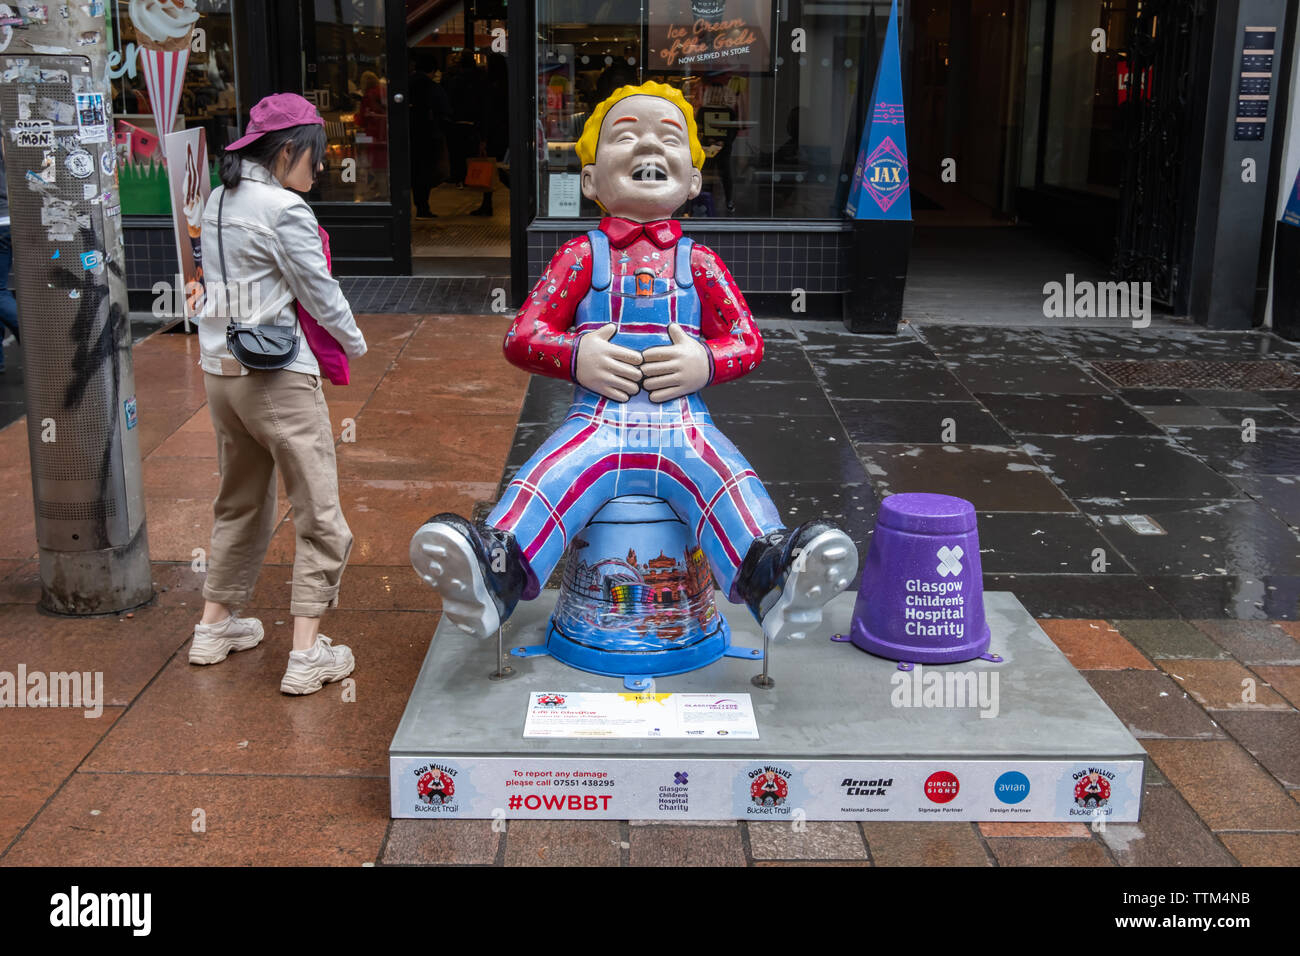 Glasgow, Scotland, UK. 17th June, 2019. Life In Glasgow, created by Taylor McTaggart. This statue shows Oor Wullie dressed in his dungarees, proudly representing the College tartan. His shirt also features the many subjects the College Offers, while his bucket depicts the very best of life in Glasgow. The sculpture is part of Oor Wullie’s BIG Bucket Trail. Credit: Skully/Alamy Live News Stock Photo